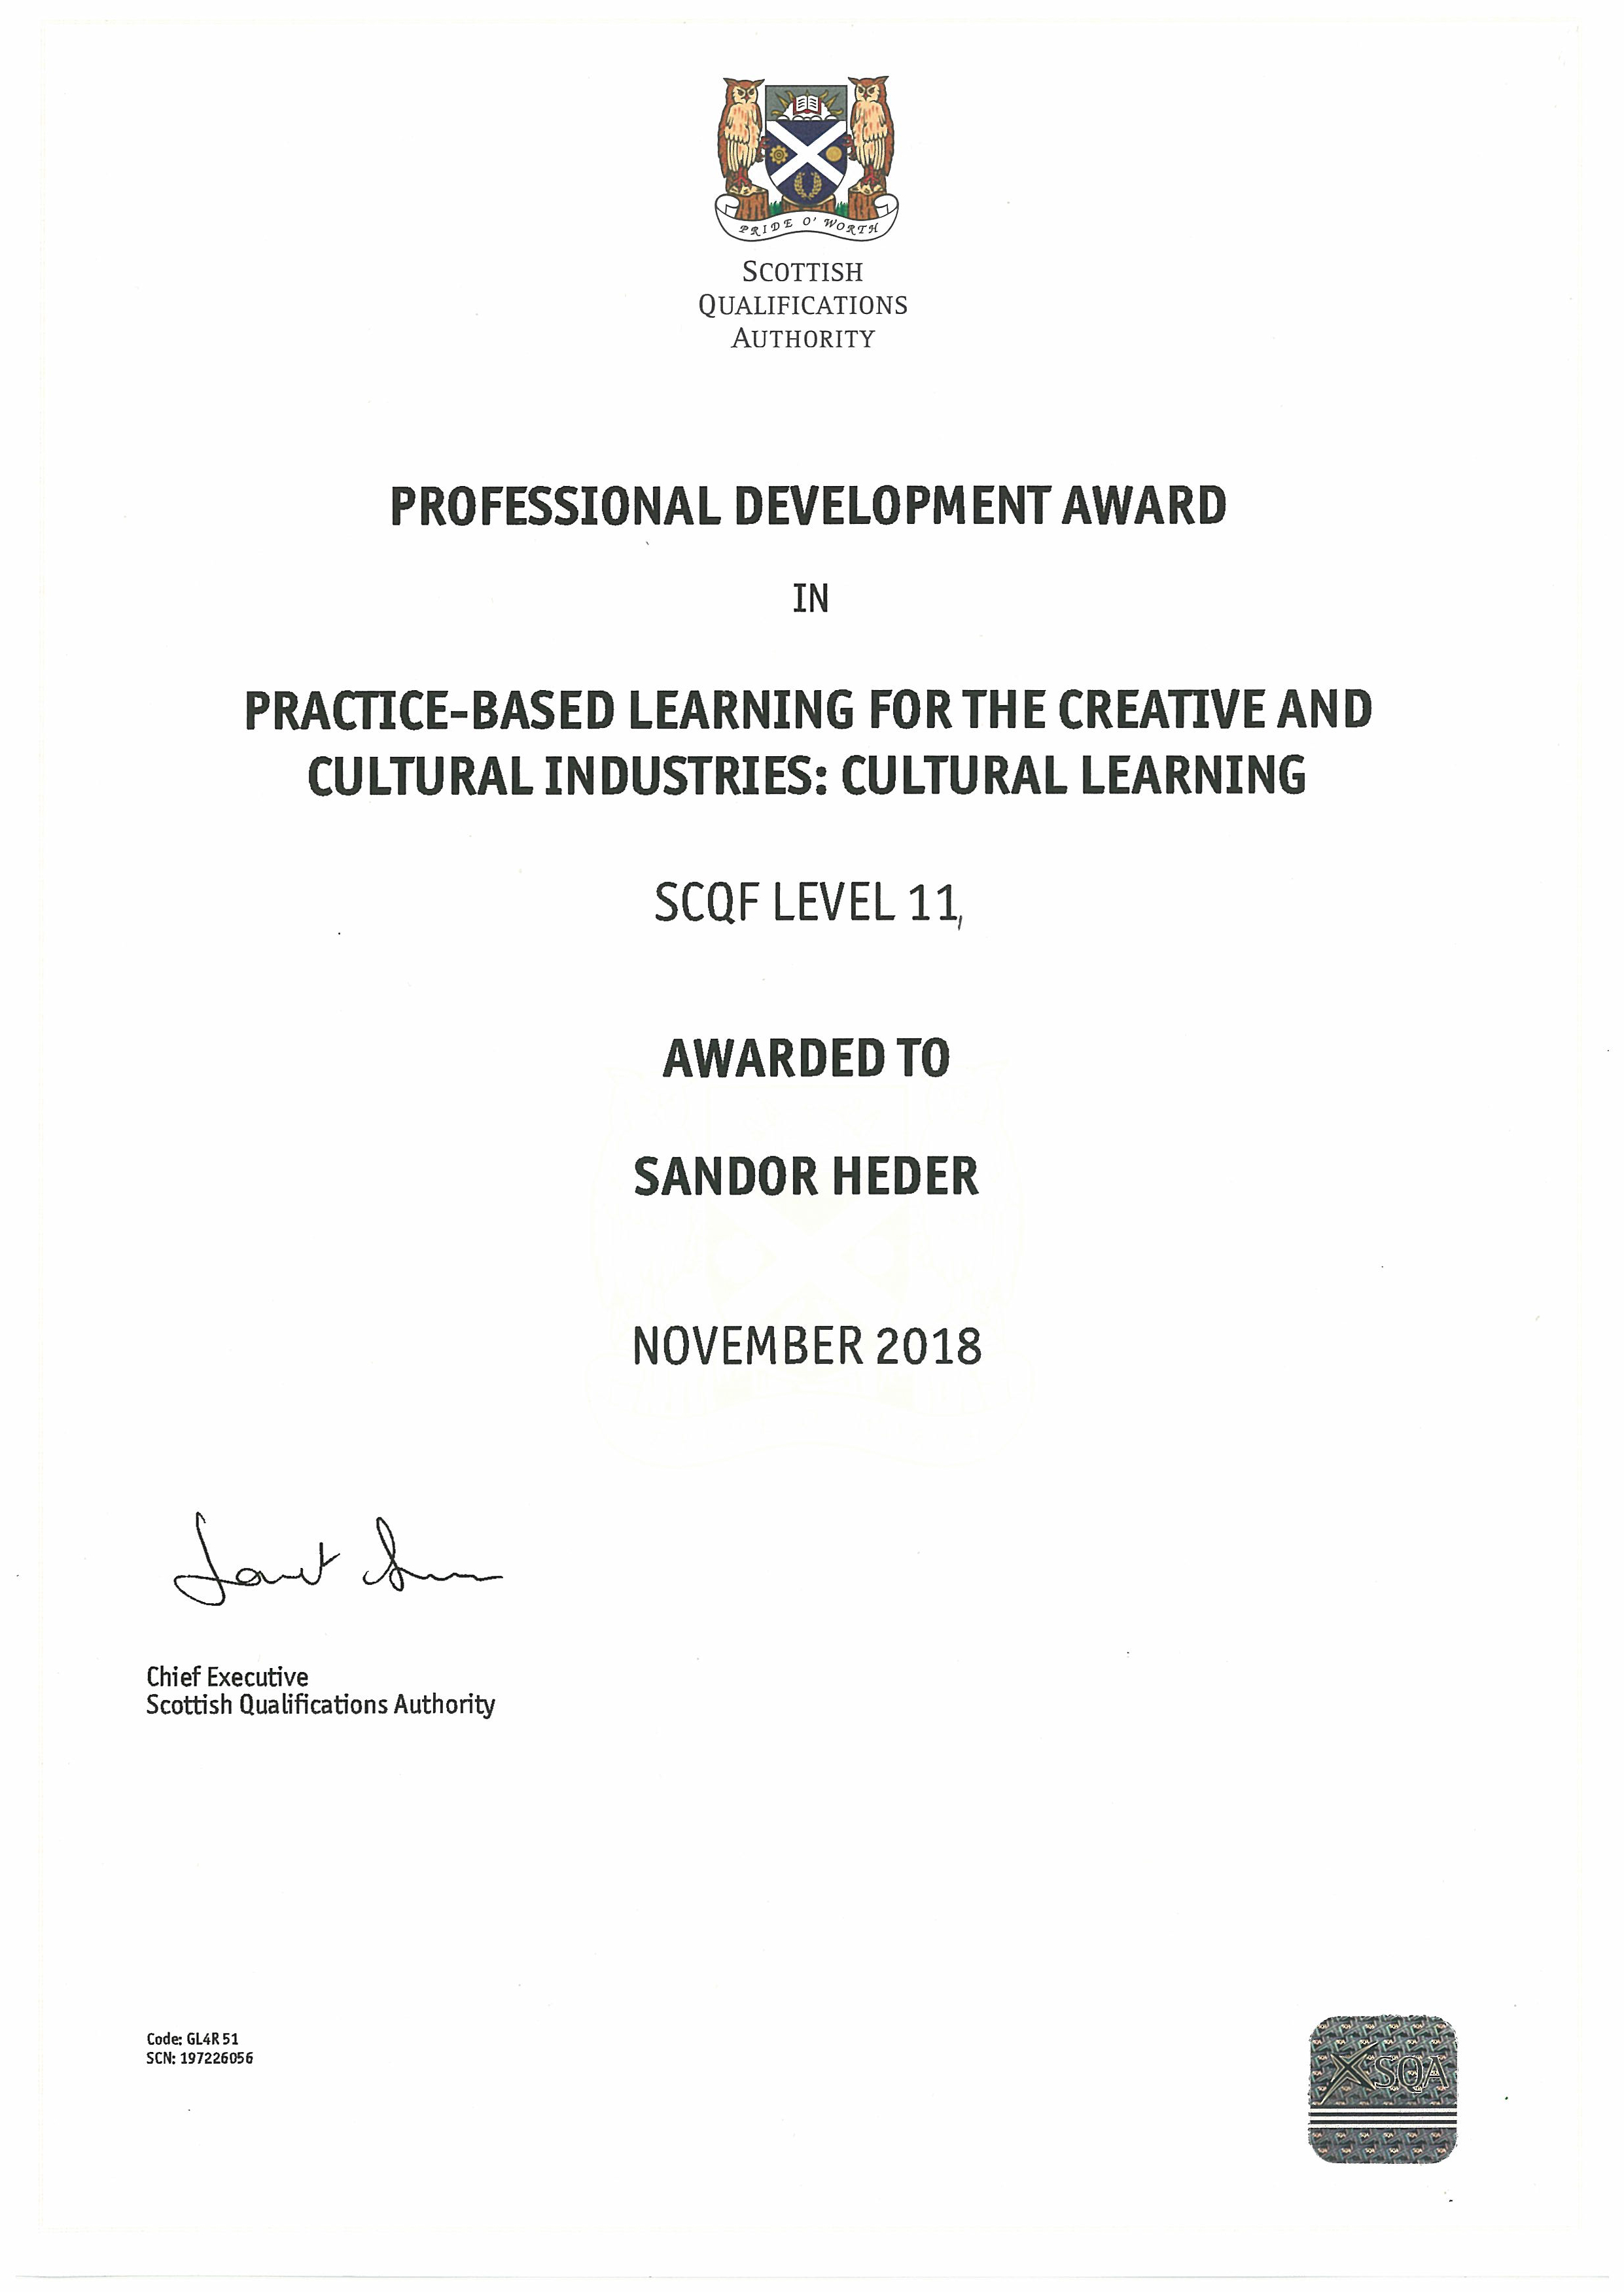 Héder Sándor - Scottish Qualifications Authorithy (SQA): Professional Development Award in Practice-based Learning for the Creative and Cultural Industries